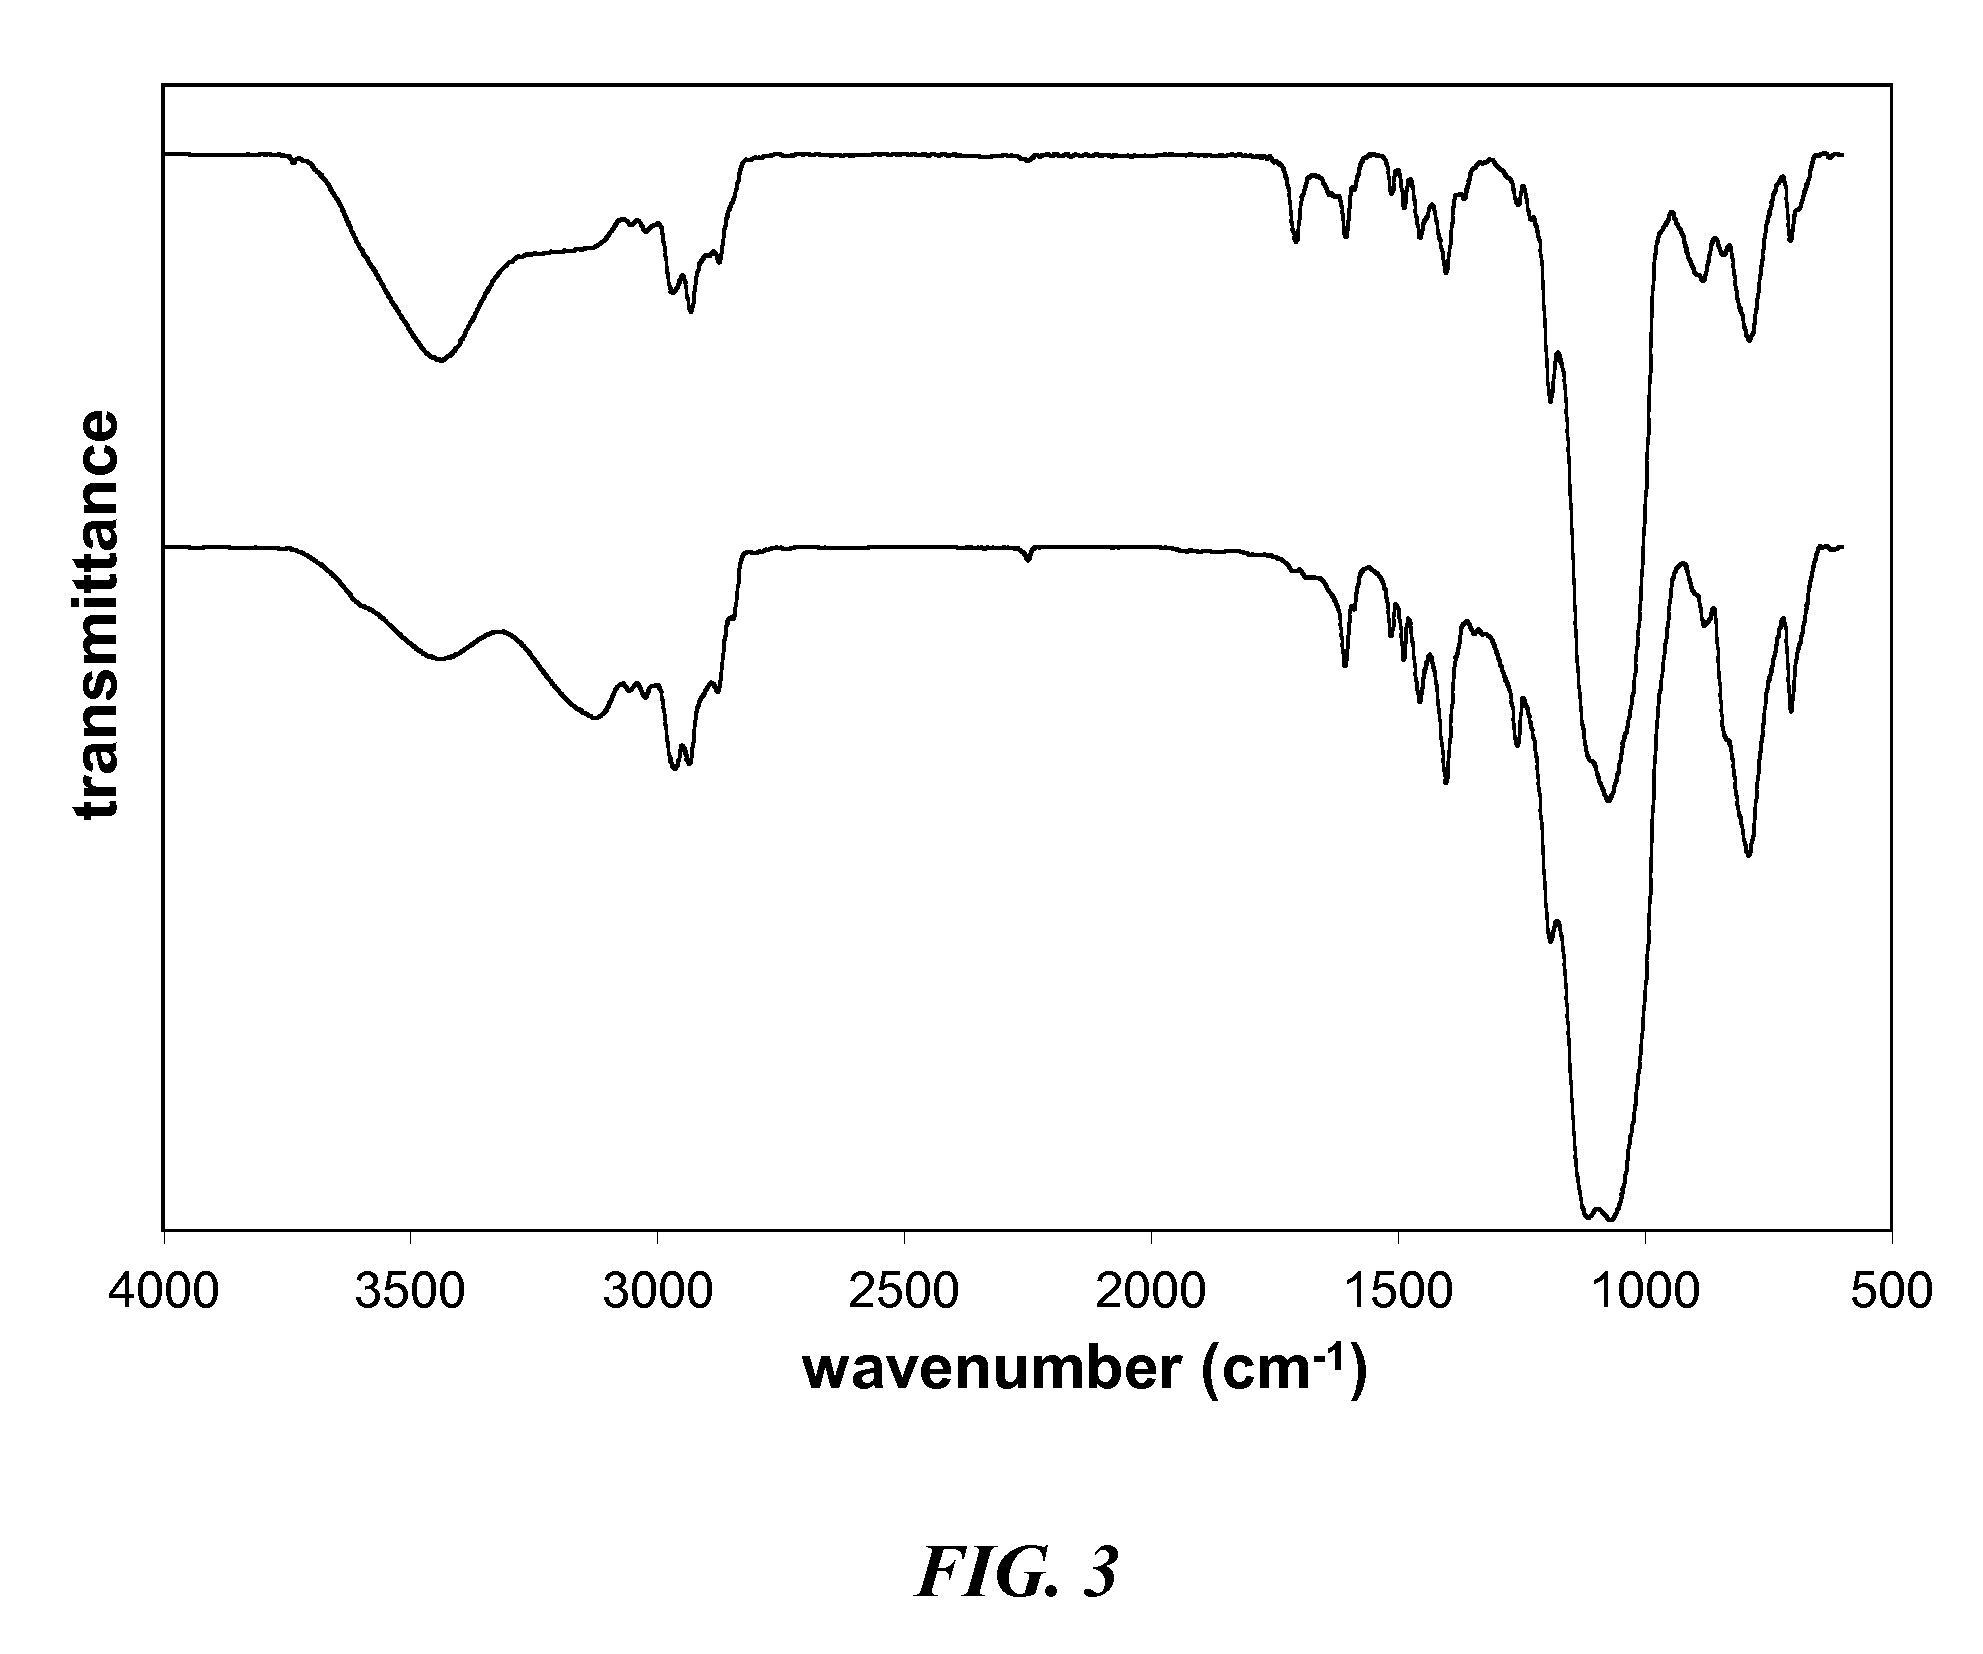 Swellable sol-gels, methods of making, and use thereof